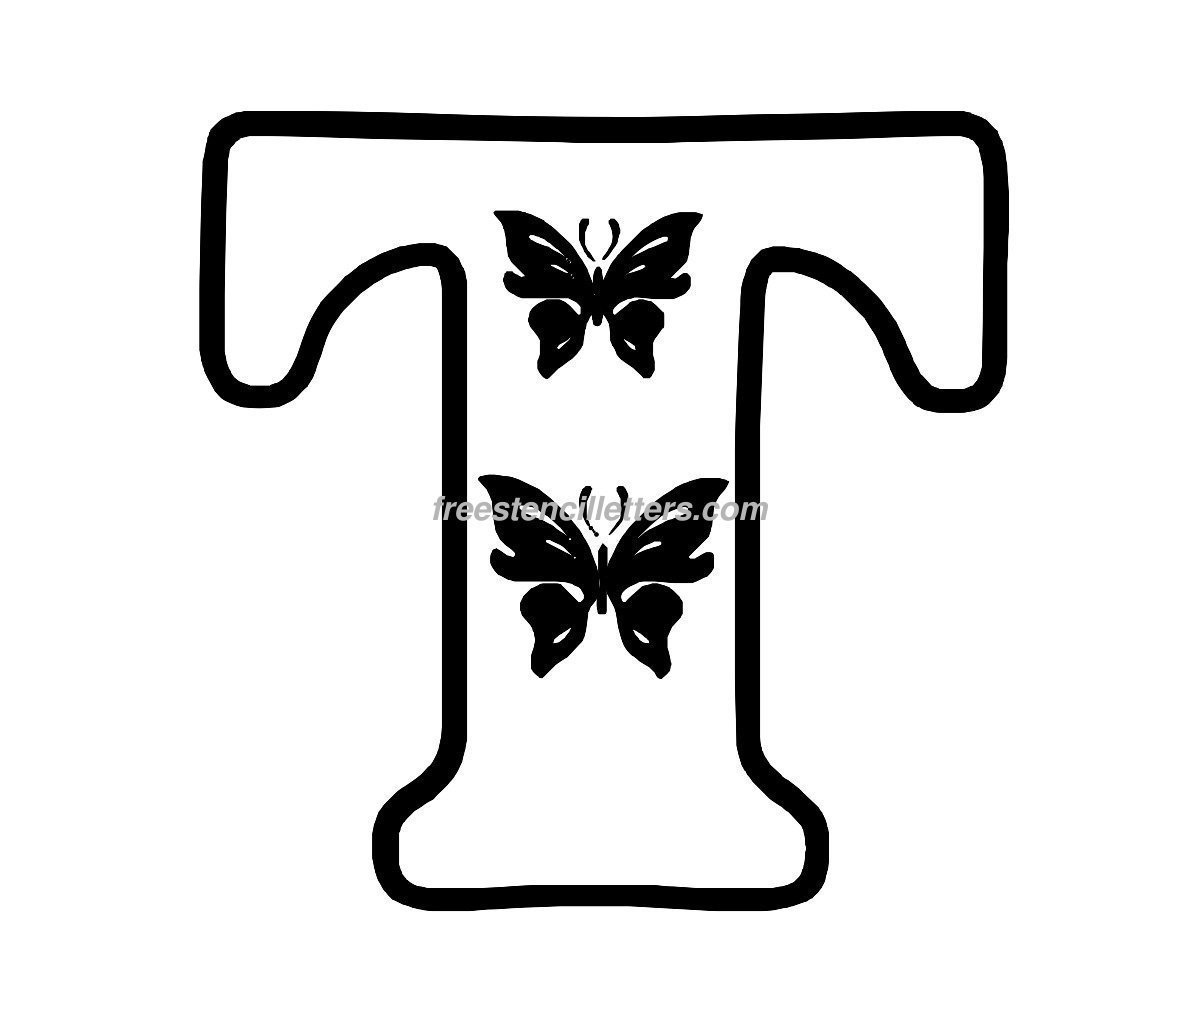 Letters Stencils to Print butterfly Stencil Letters Archives Free Stencil Letters